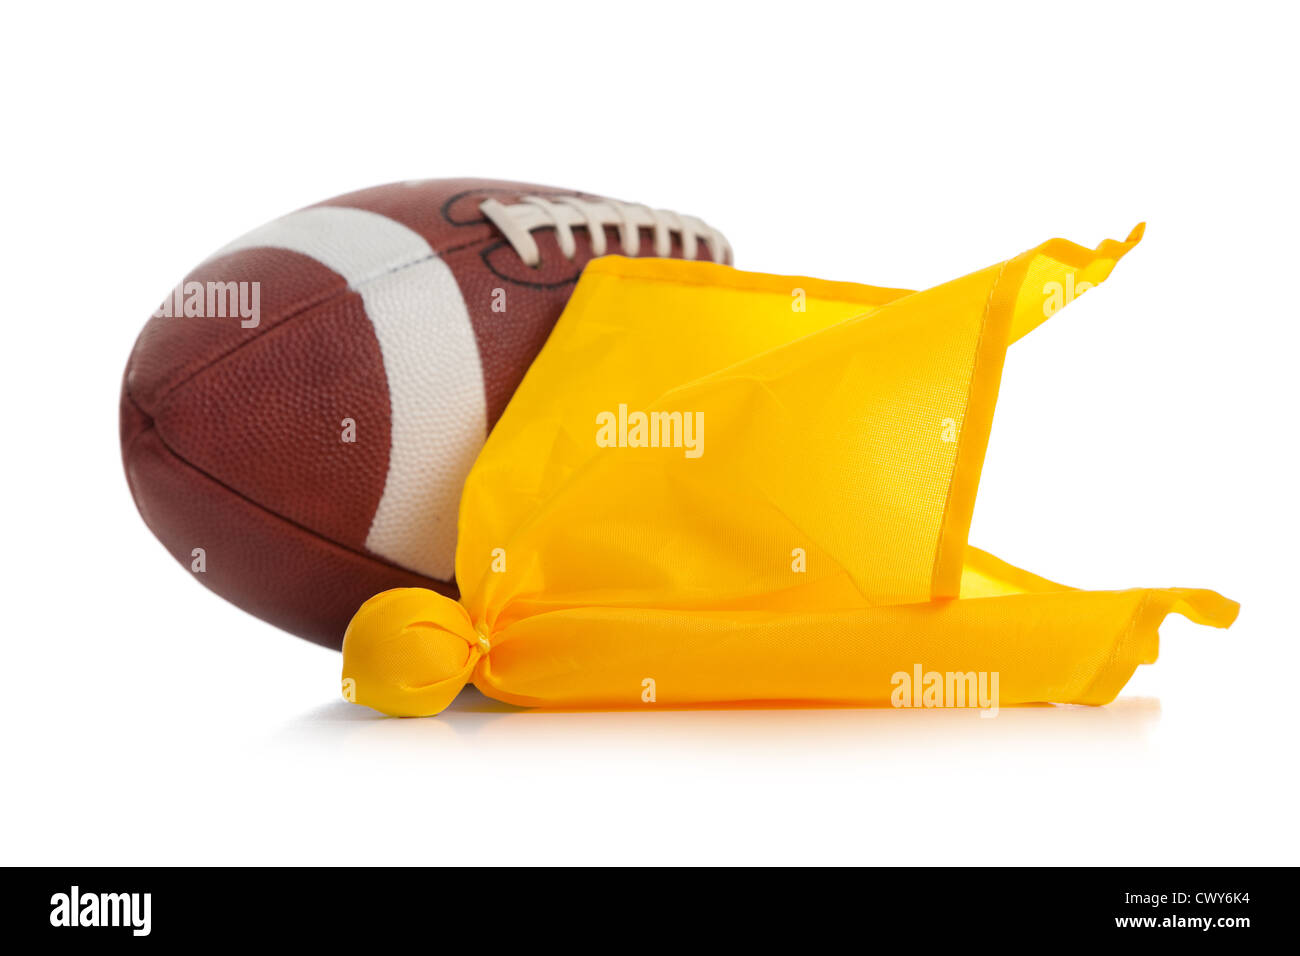 An American football and yellow penalty flag on a white background Stock Photo